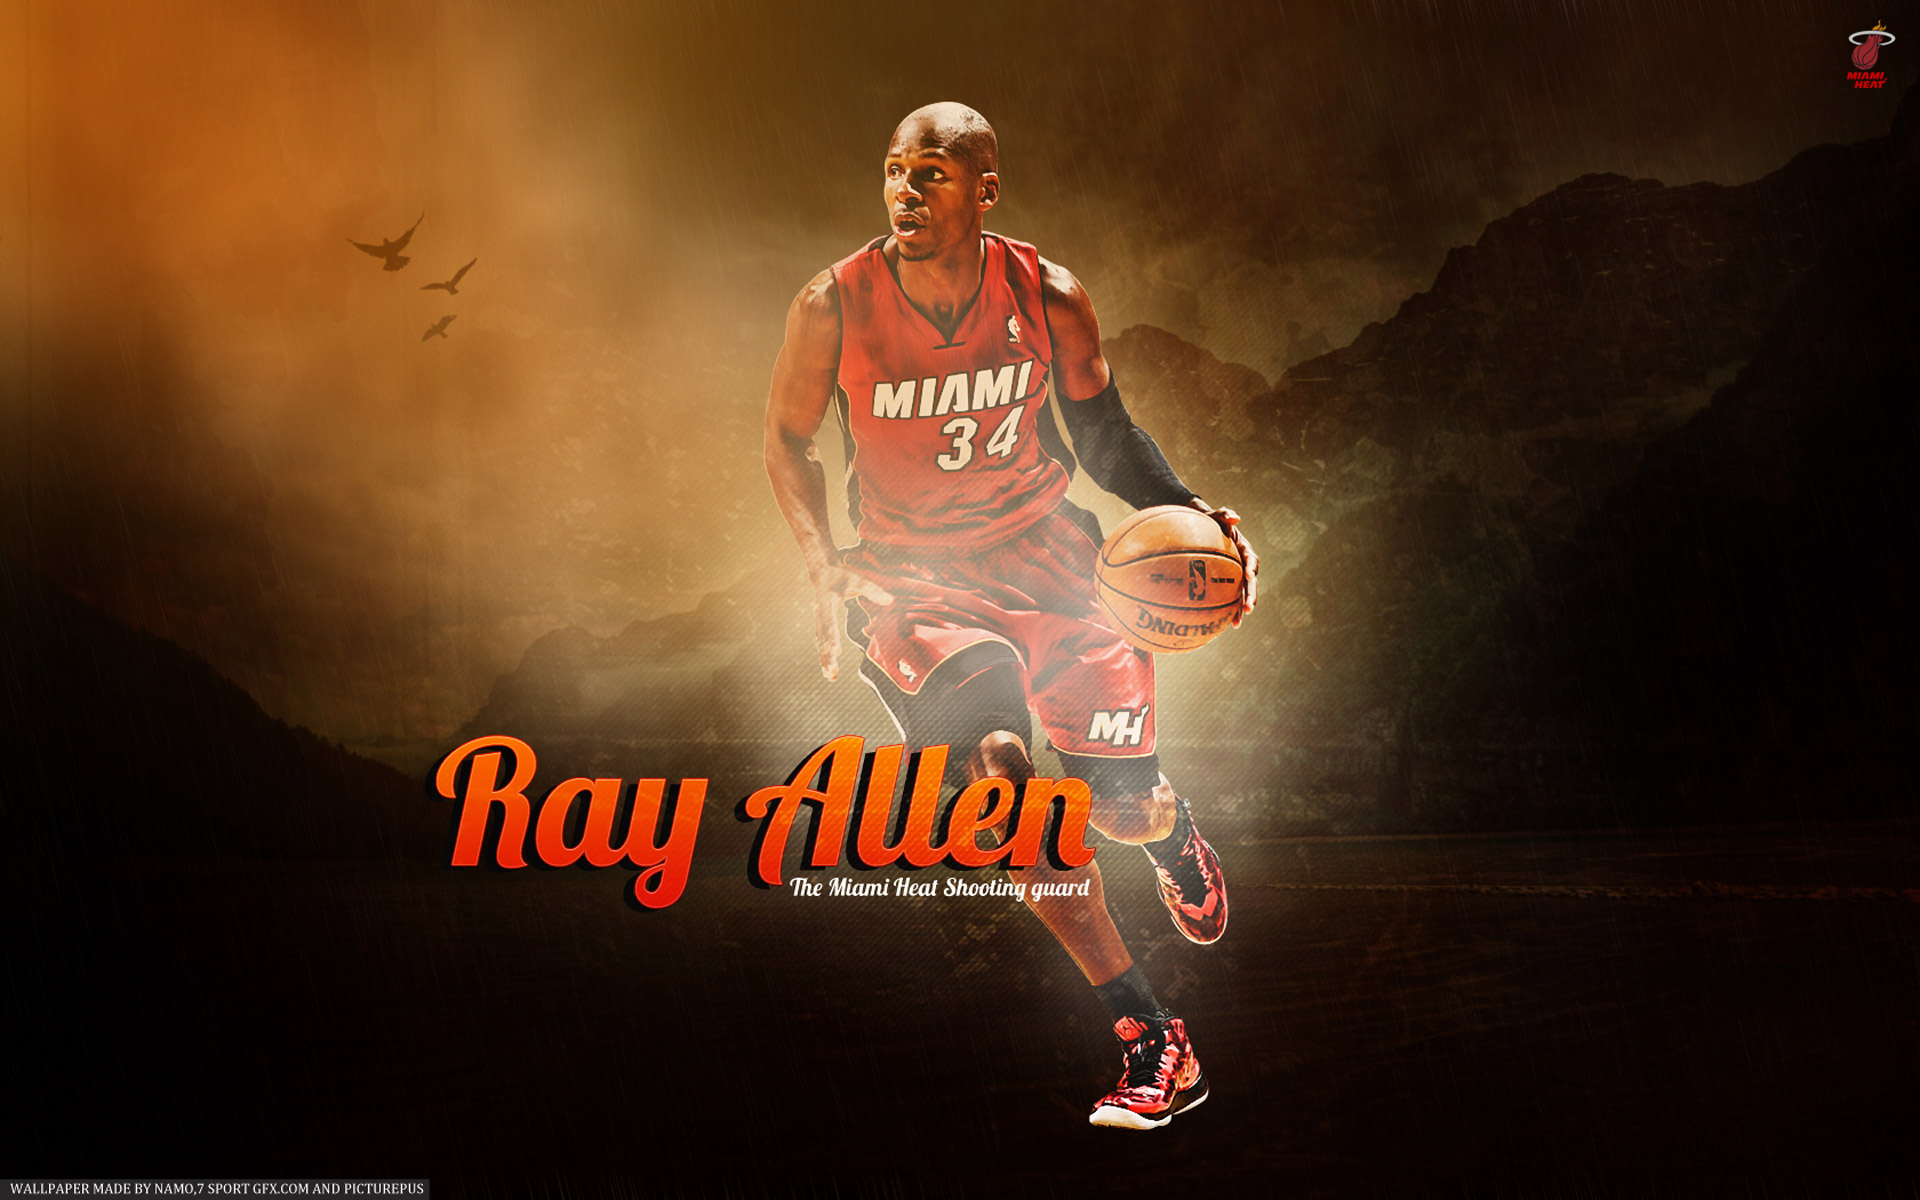 Ray Allen Wallpapers | Basketball Wallpapers at BasketWallpapers.com